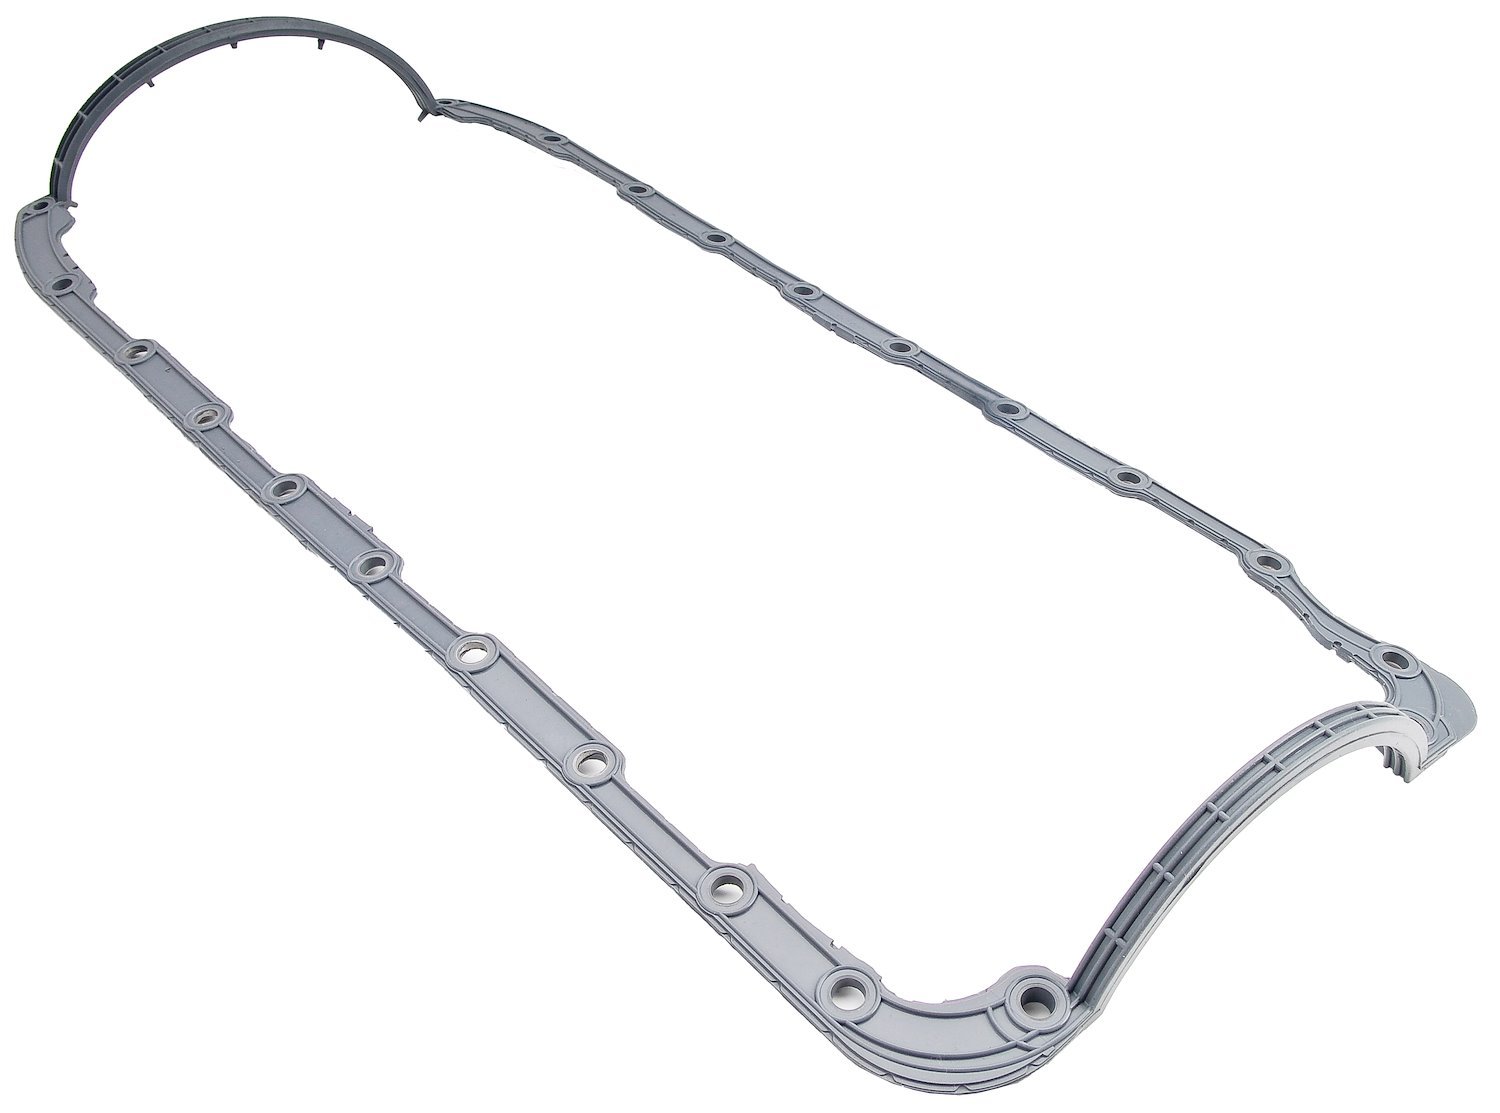 Oil Pan Gasket for Big Block Chevy Mark IV